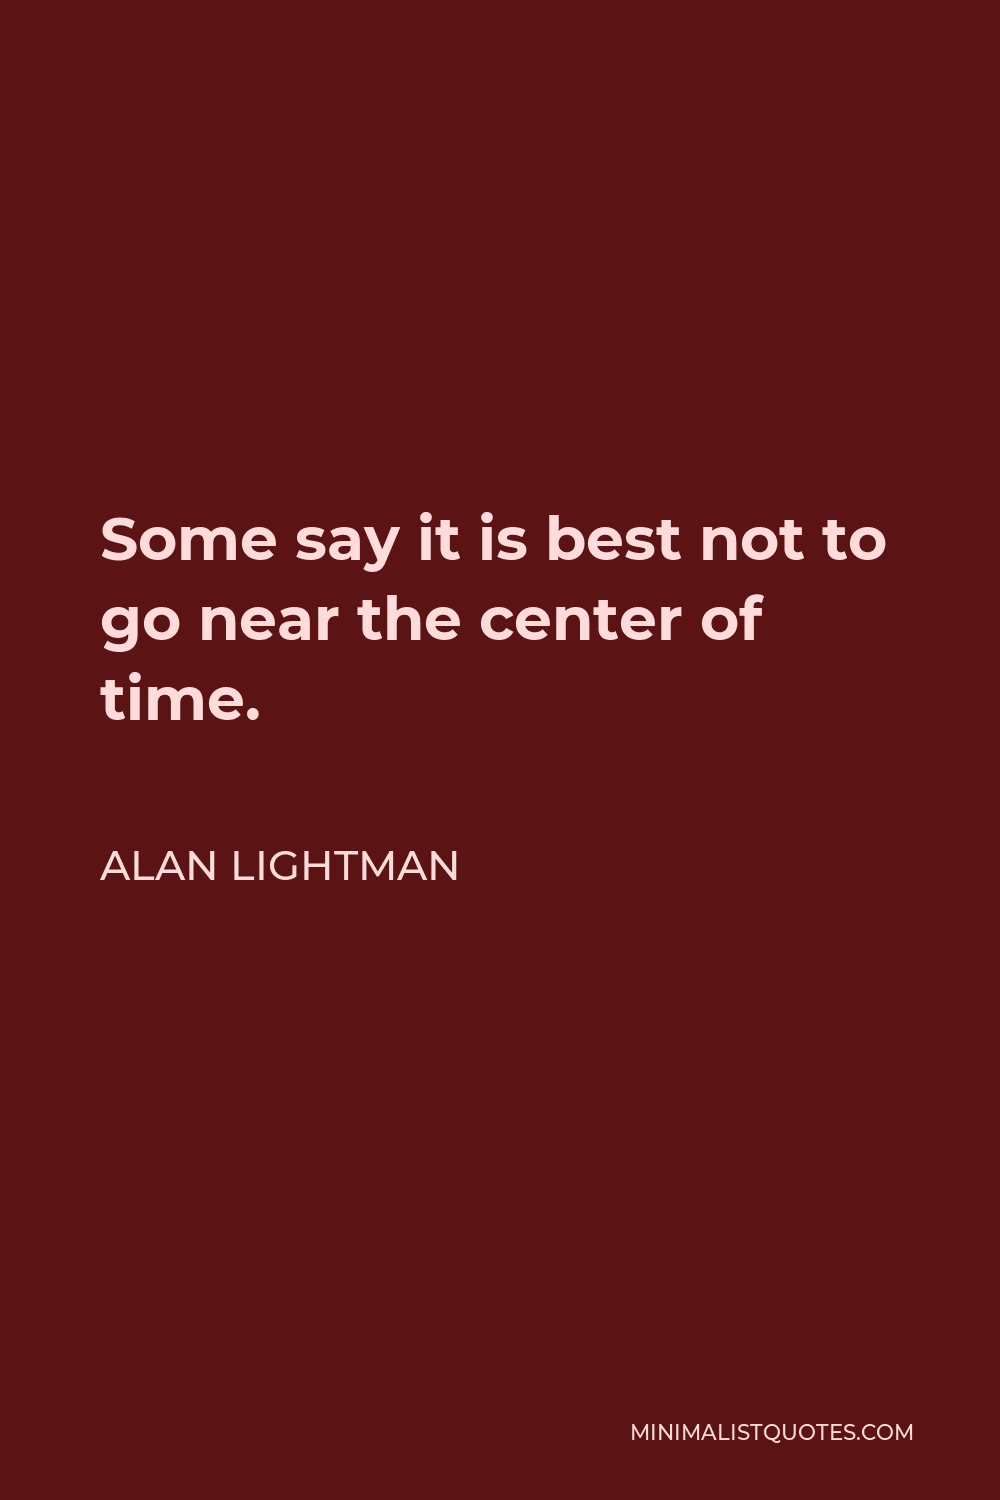 Alan Lightman Quote - Some say it is best not to go near the center of time.